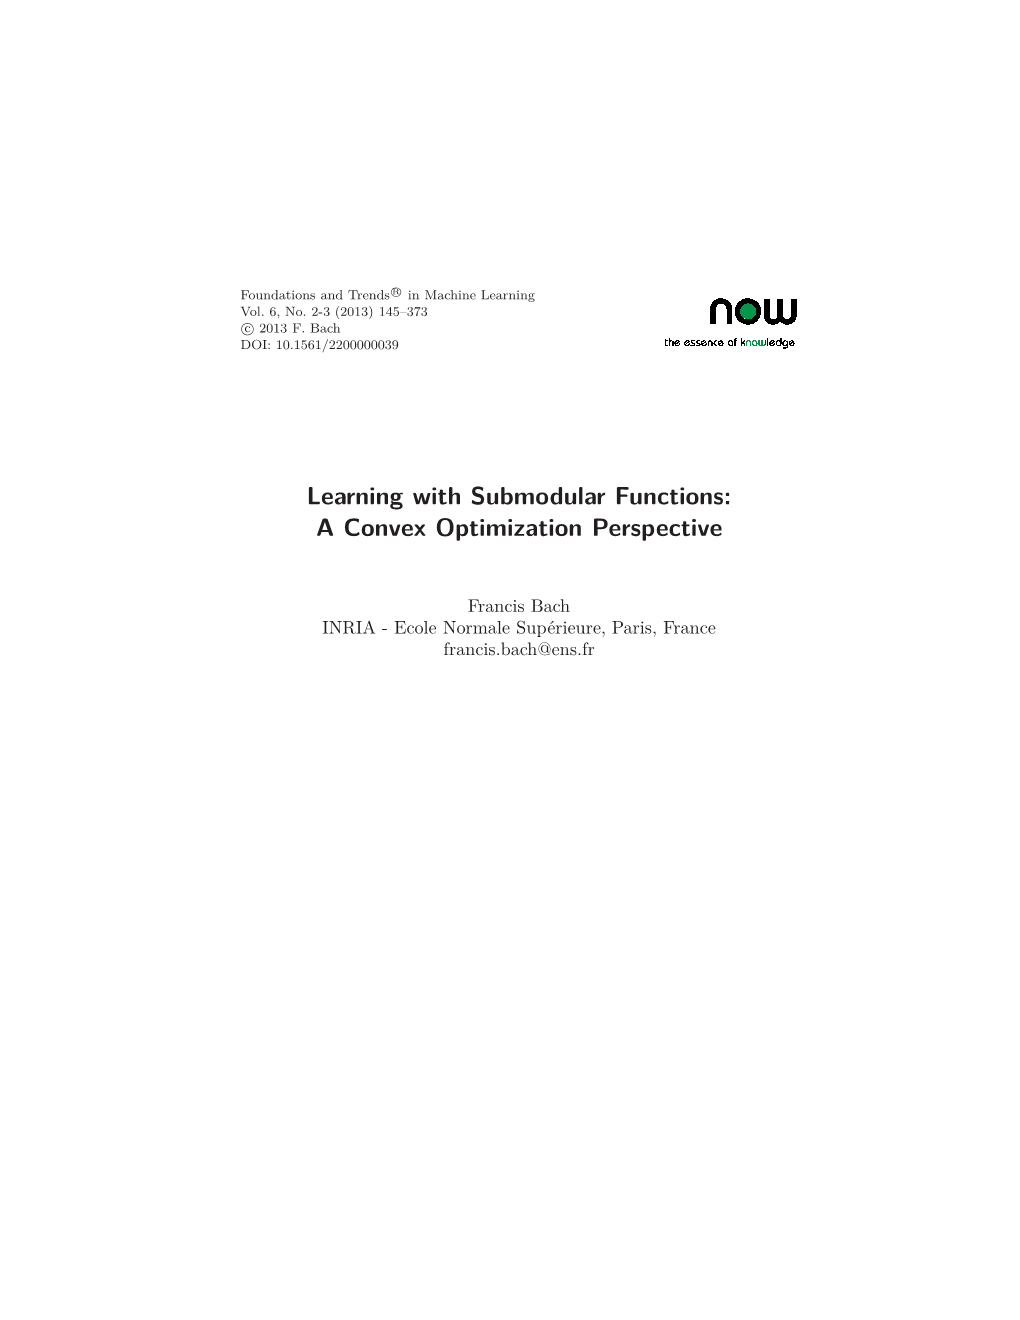 Learning with Submodular Functions: a Convex Optimization Perspective